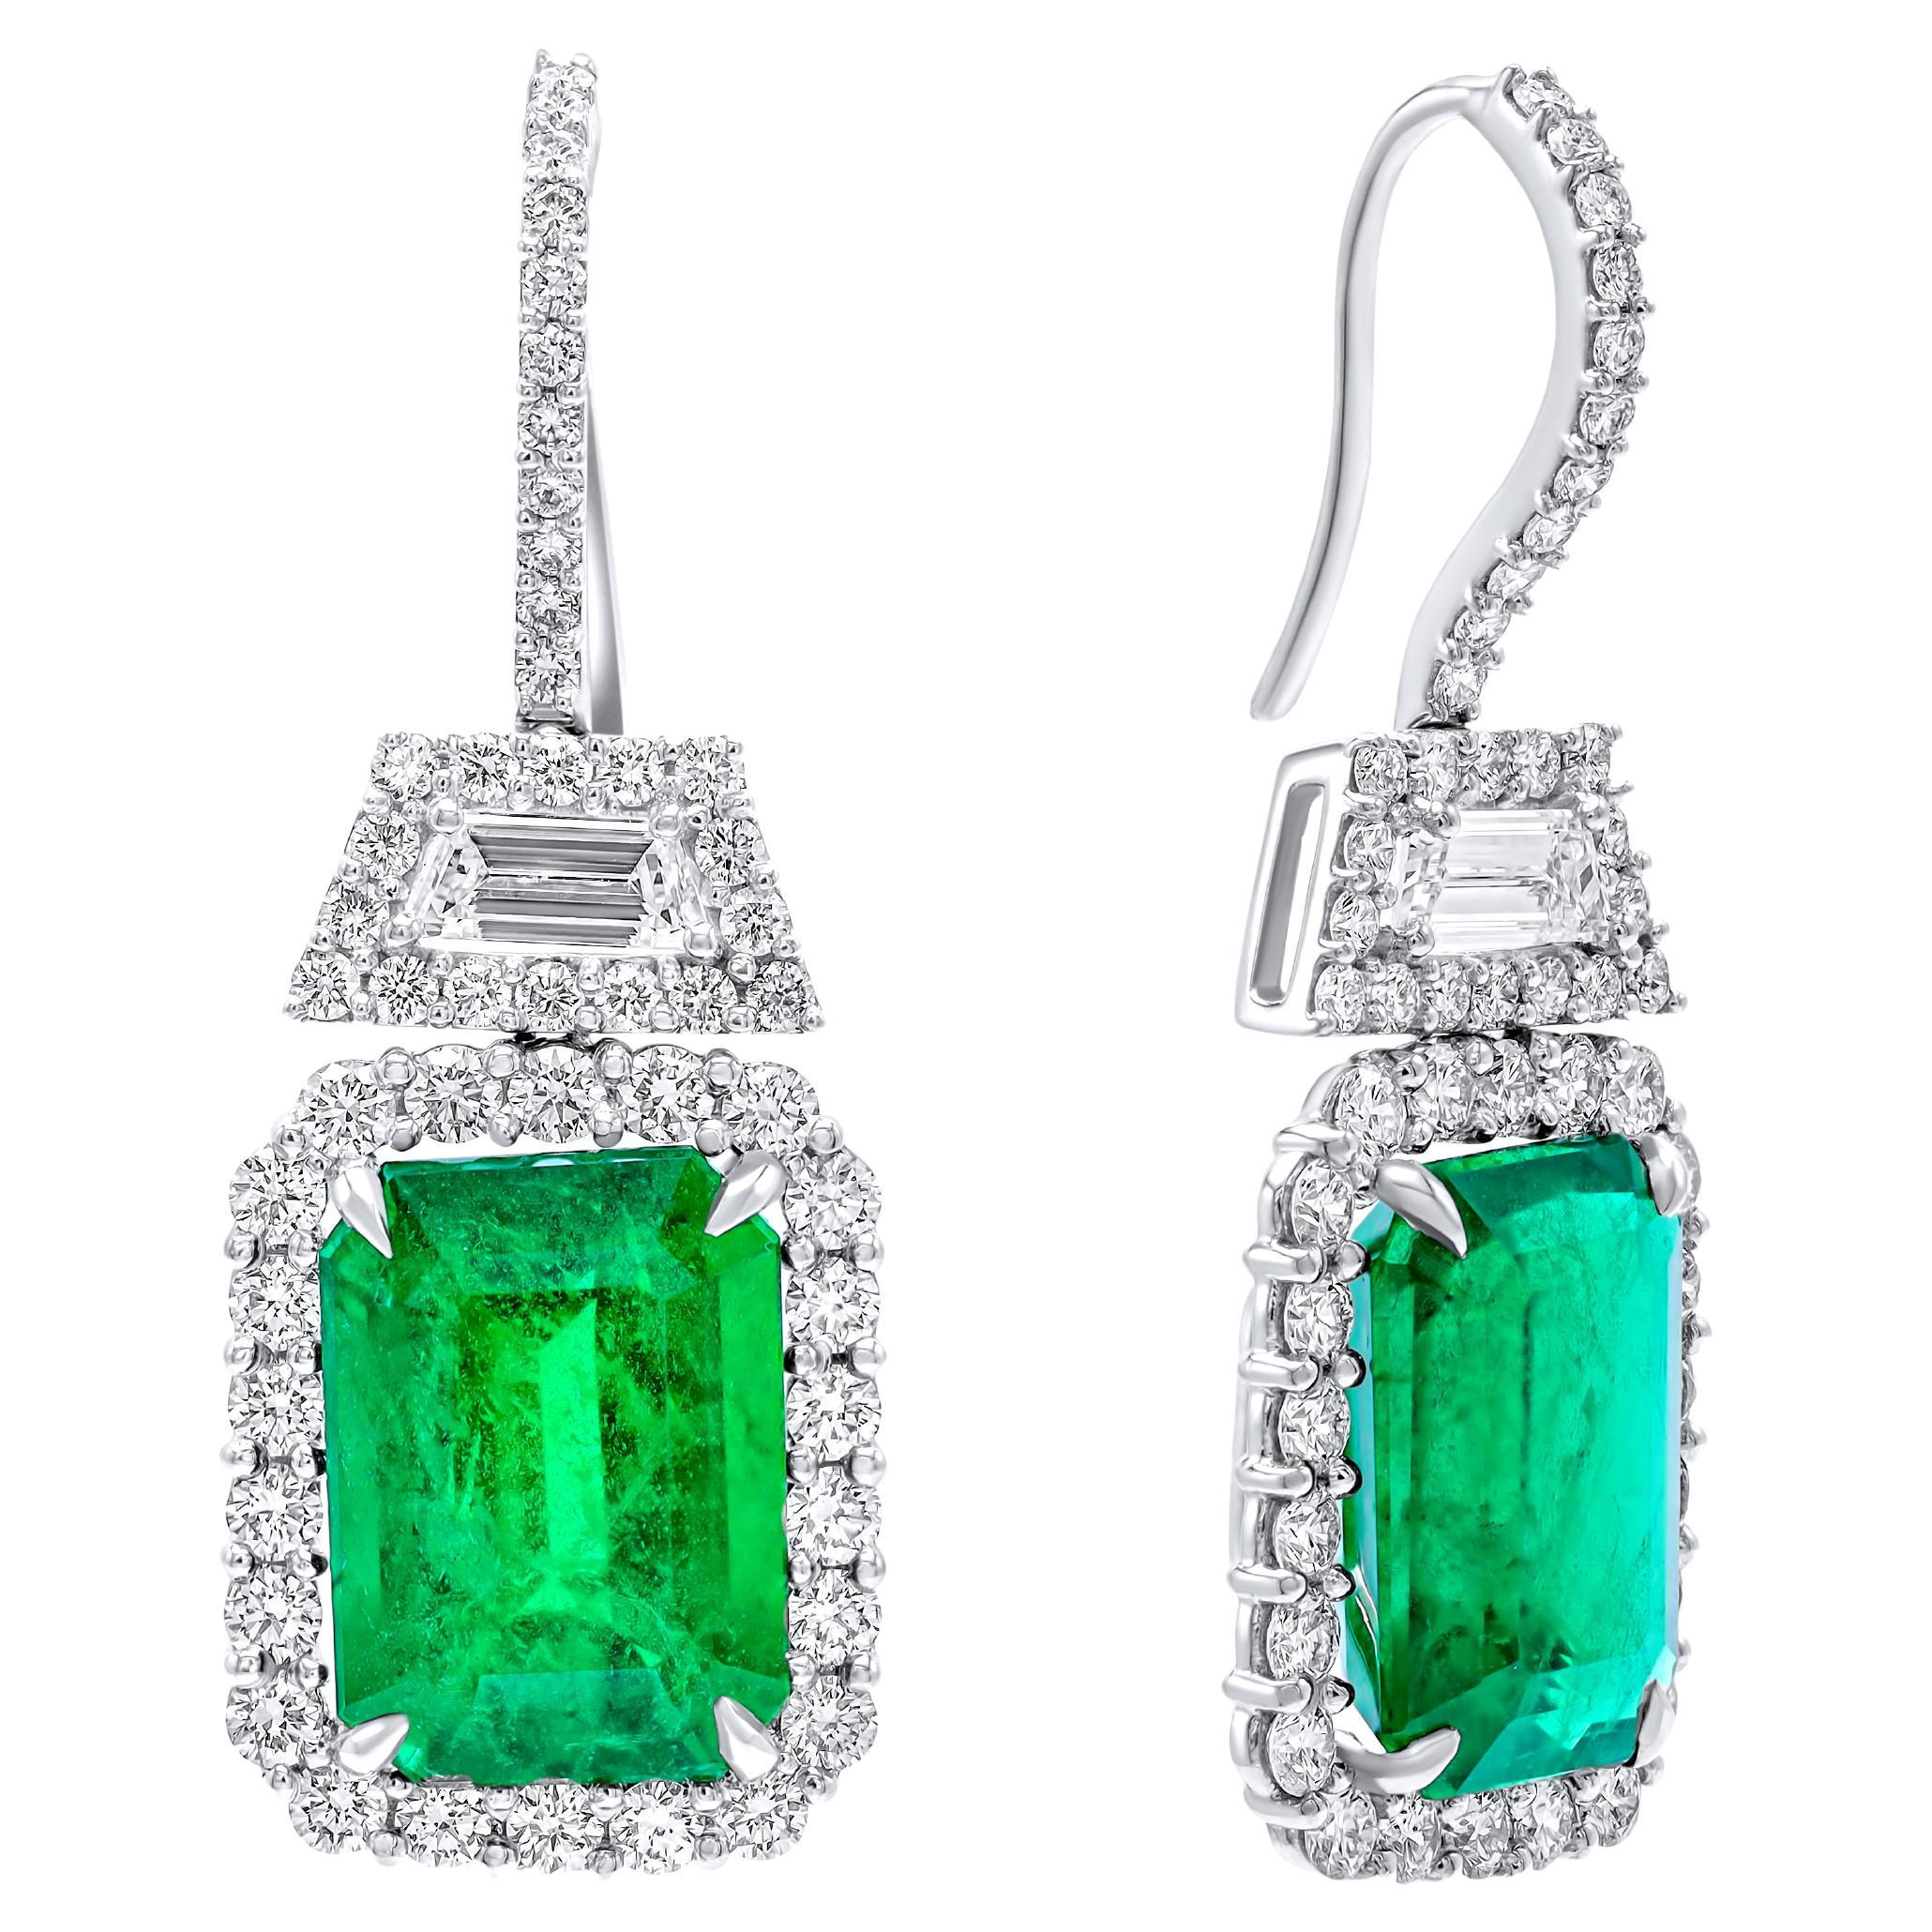 Diana M. 18kt Emerald and Diamond Earrings 15.71ct Emeralds 3.60cts of Diamonds  For Sale